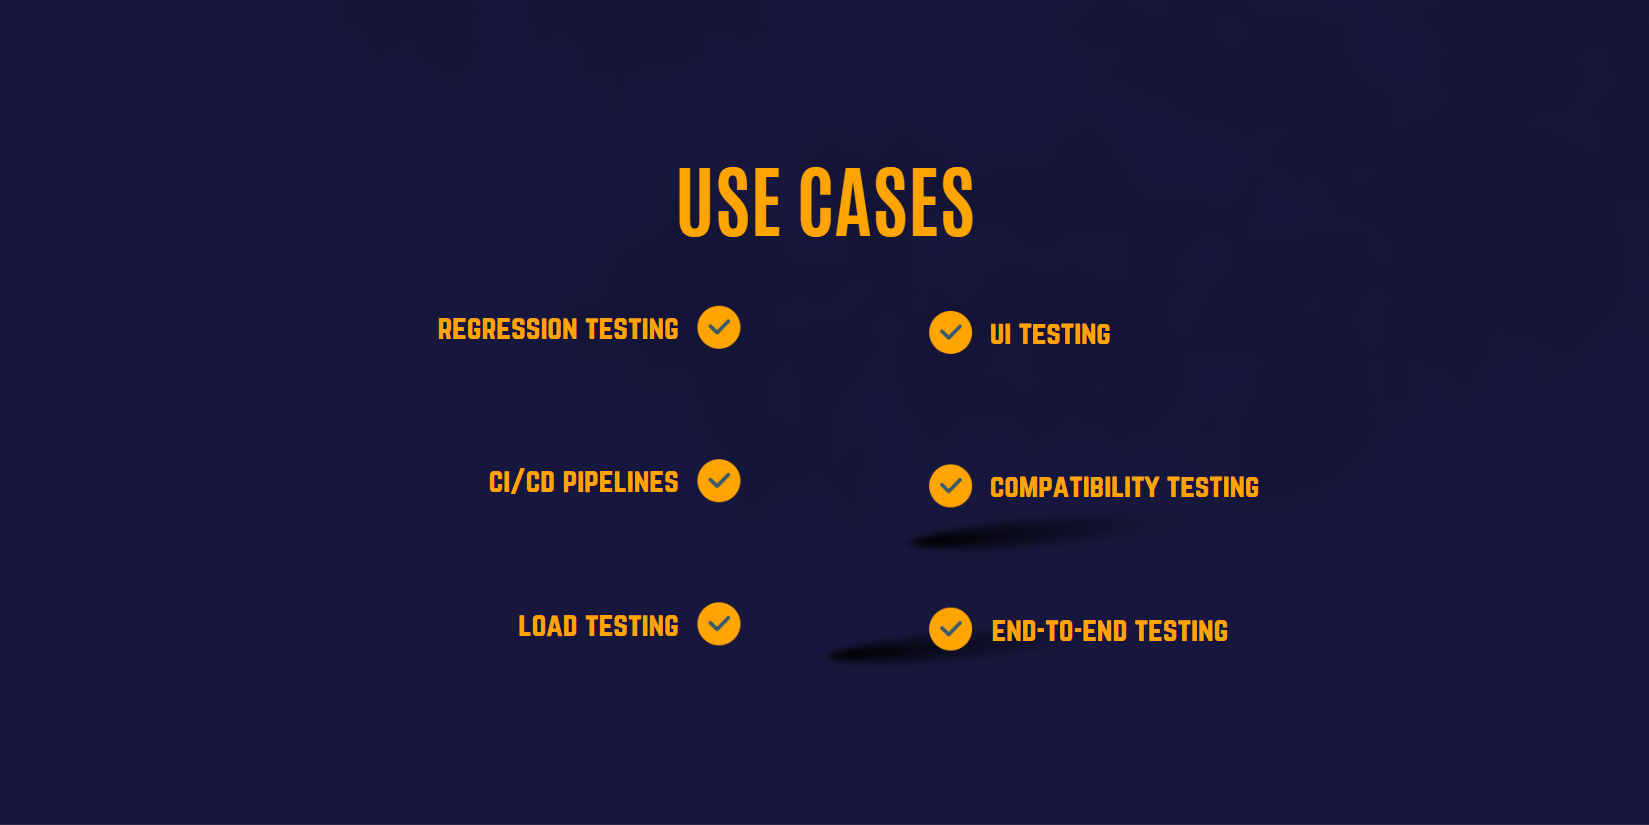 Use cases for test automation